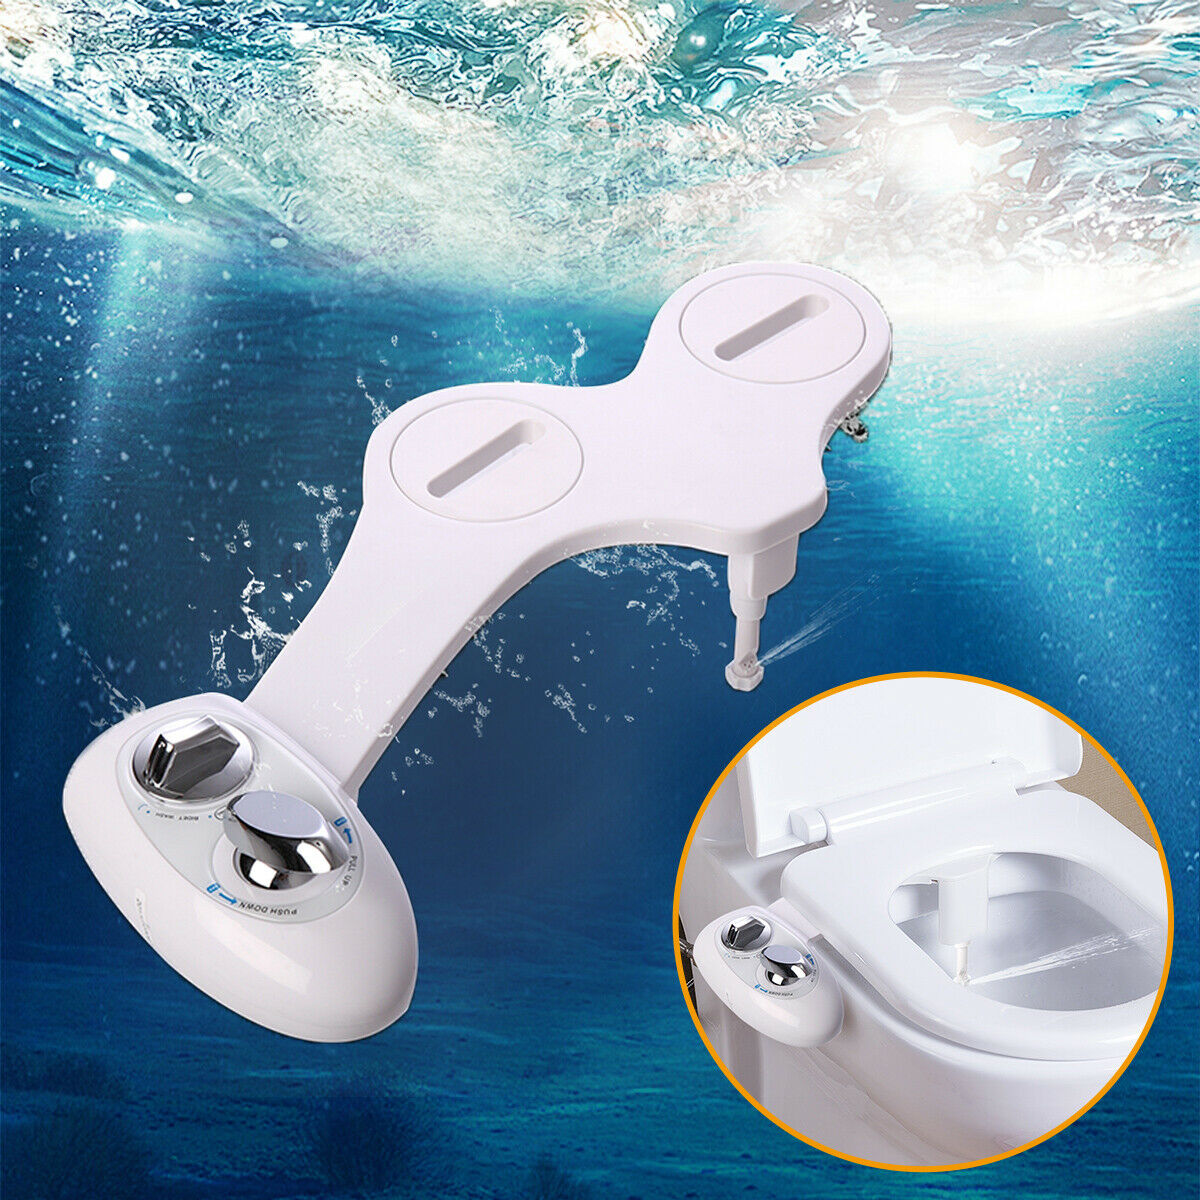 Adjustable Self-cleaning Nozzle,non-electric Water Spray Bidet Toilet Seat